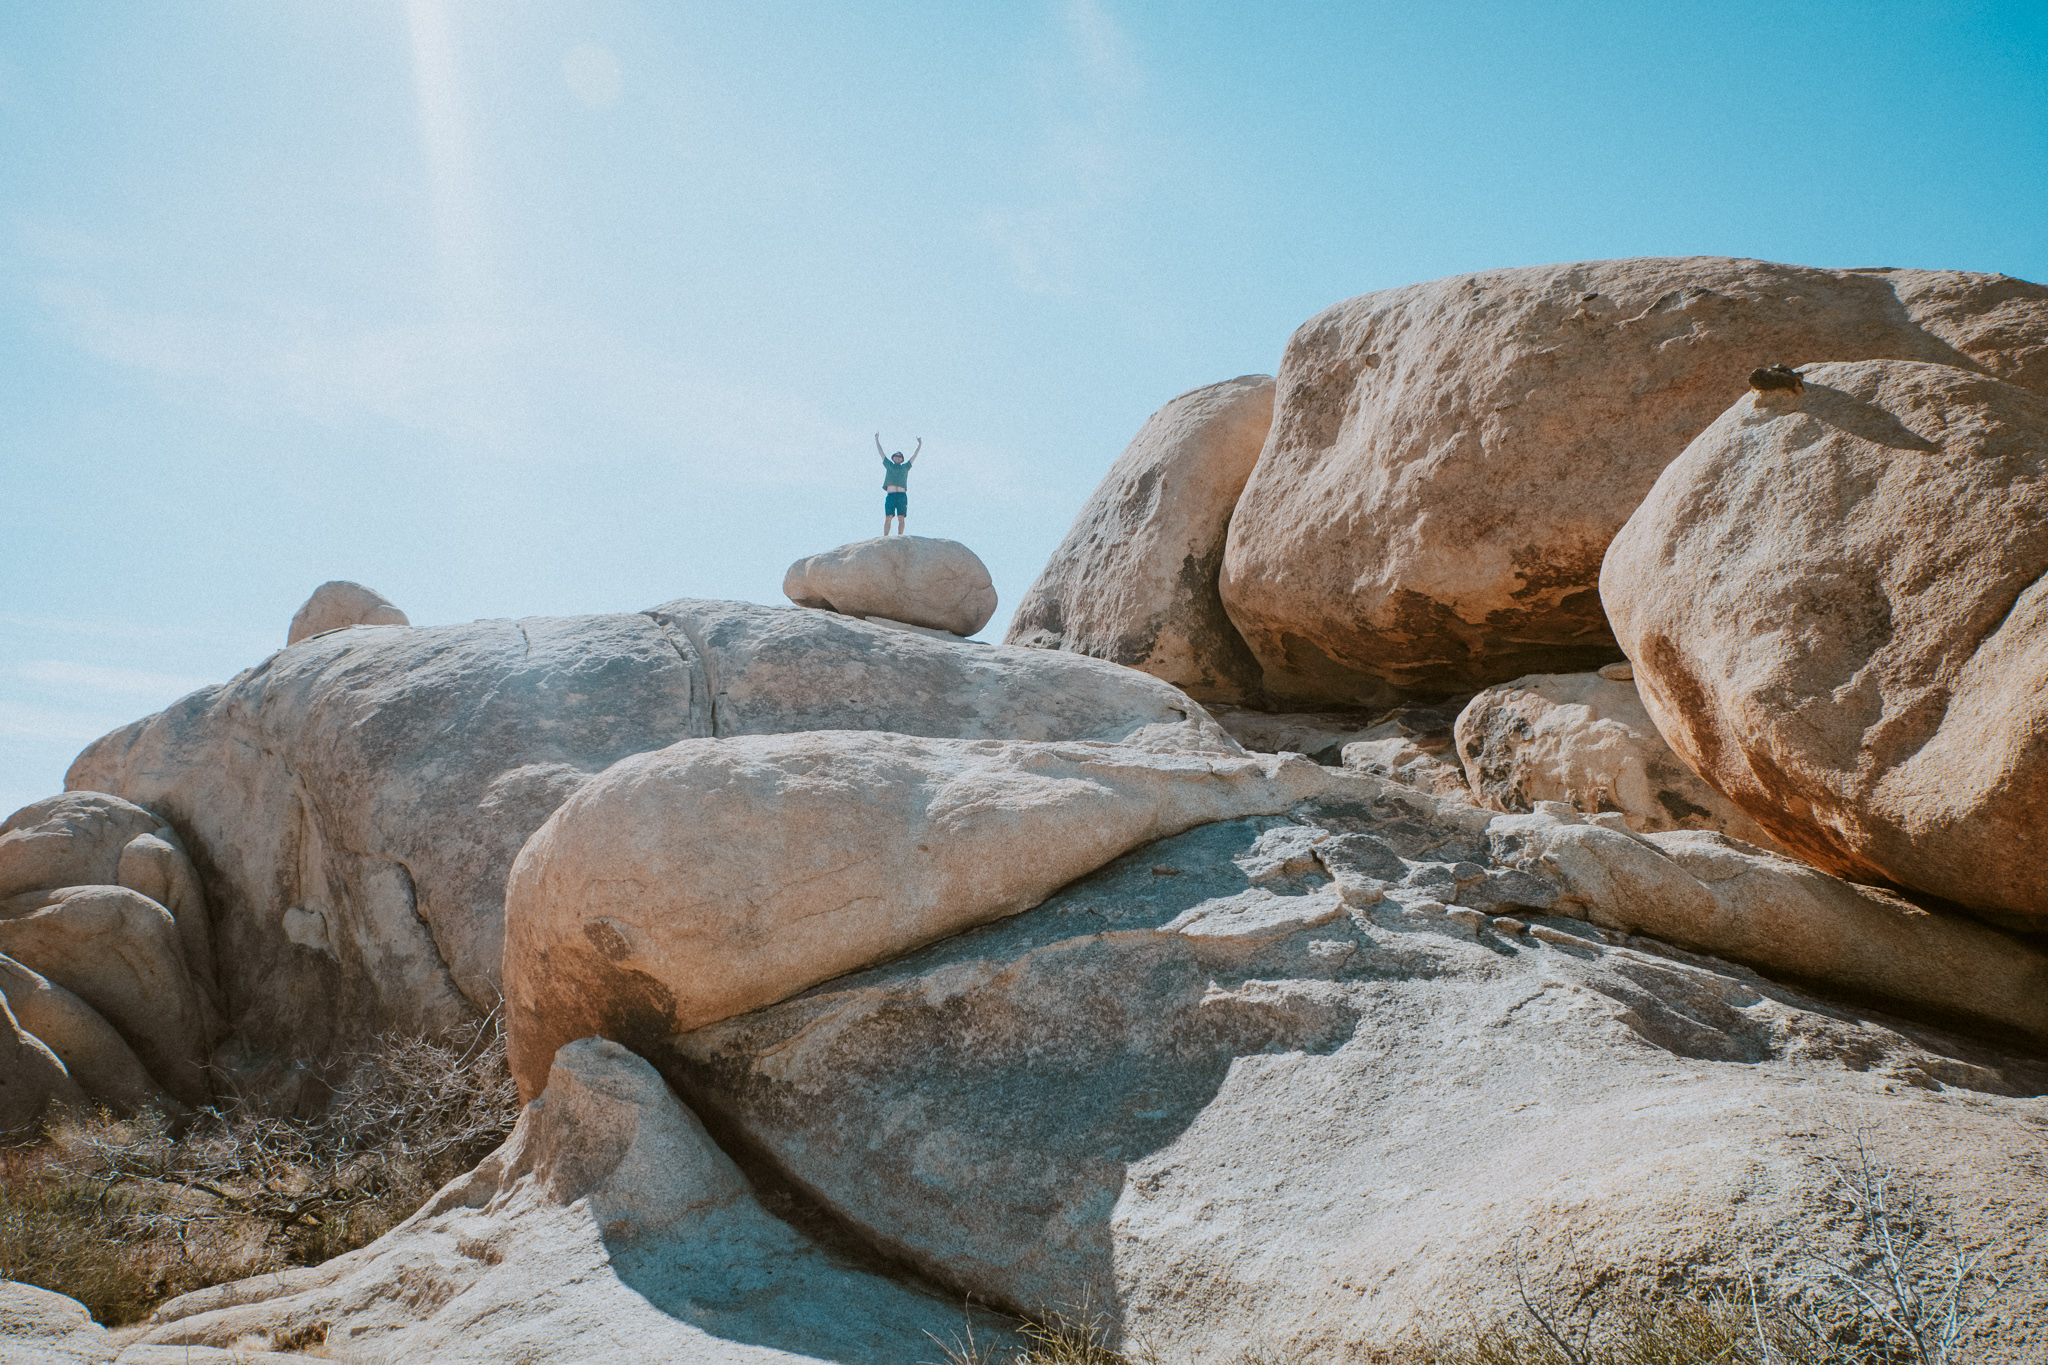 Phil on top of a rock in Joshua Tree National Park 